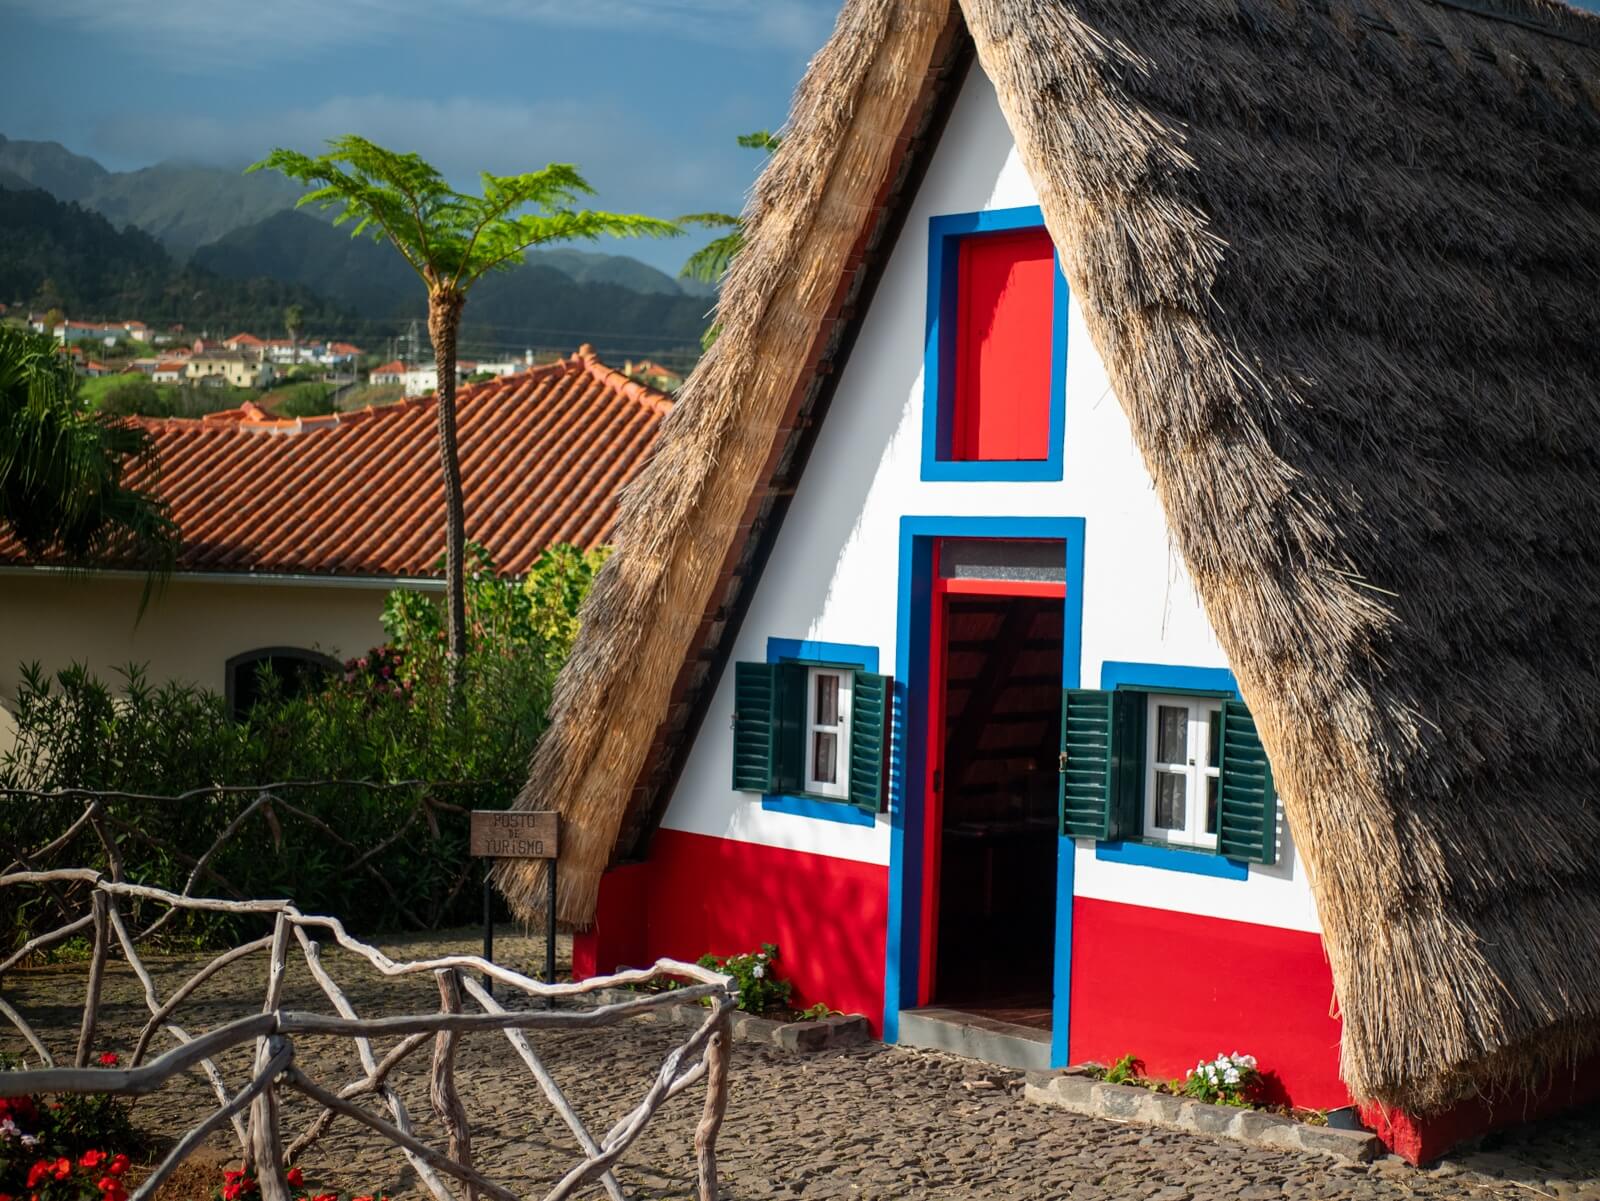 The True Flavours & Natural Beauty of Madeira Islands - Santana Typical Homes